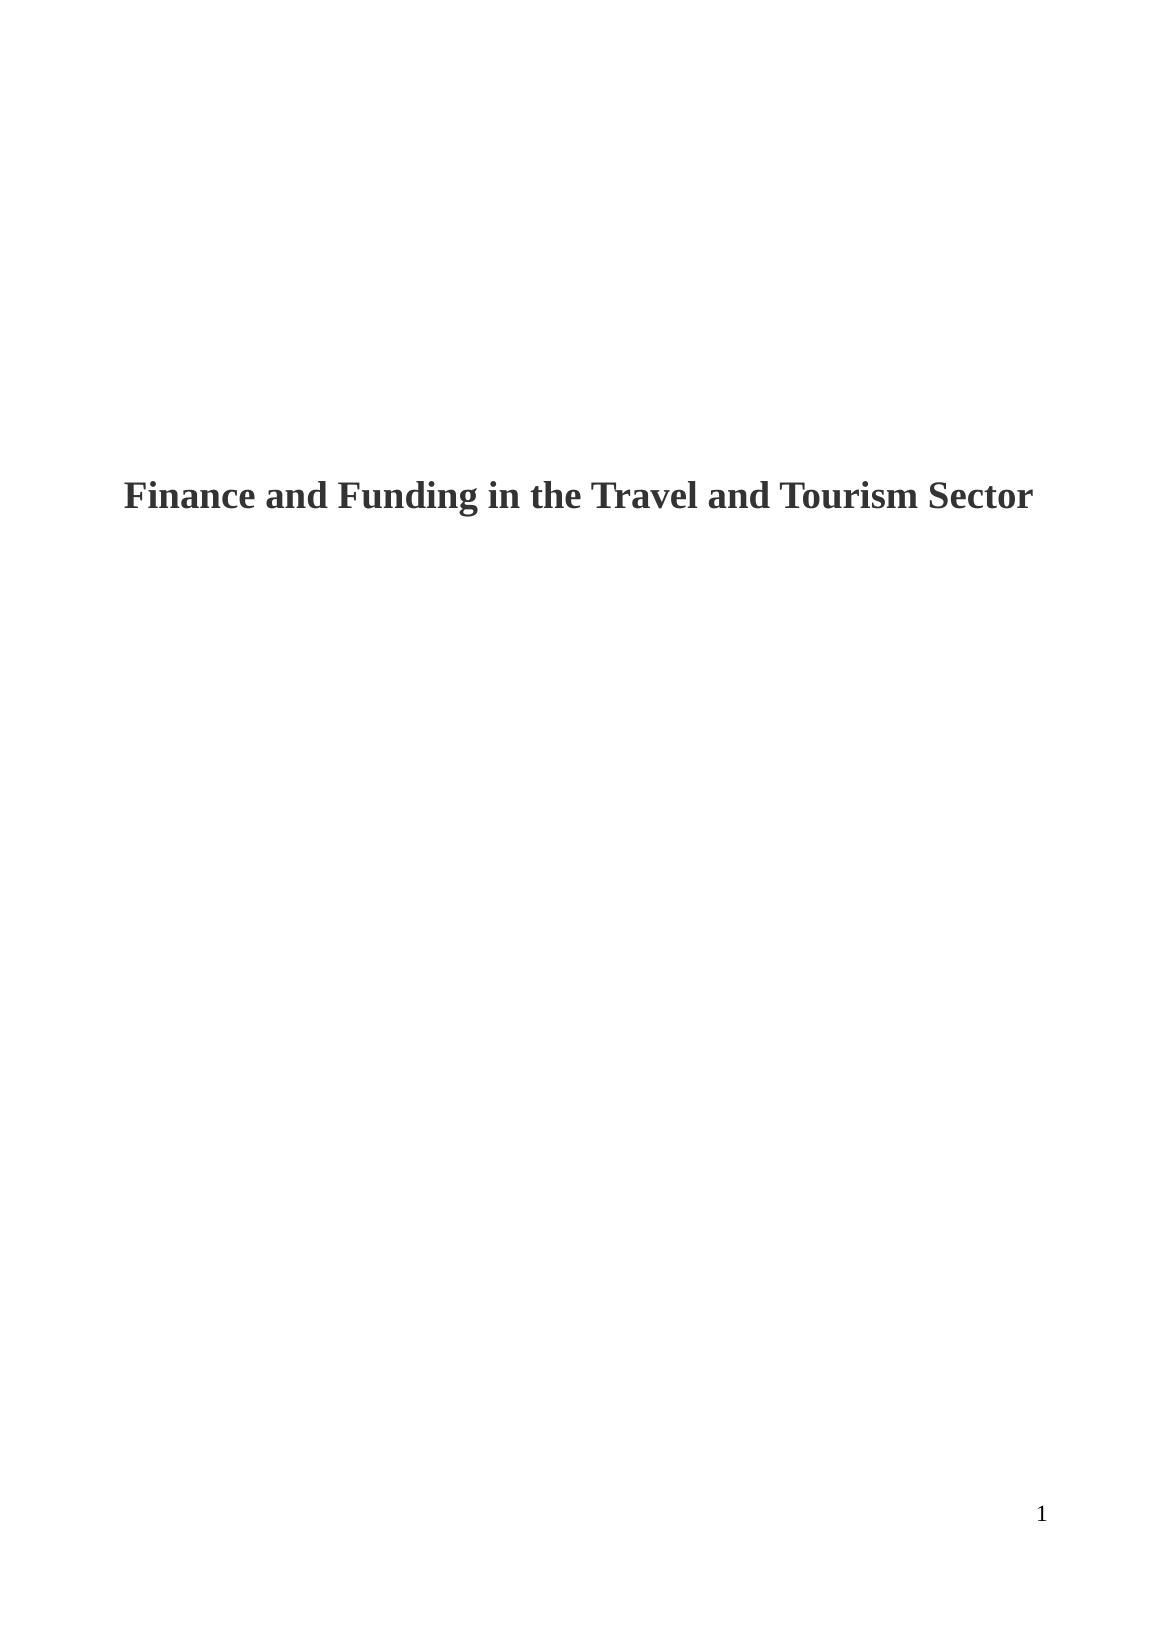 Finance and Funding in Travel and Tourism Sector : Assignment_1